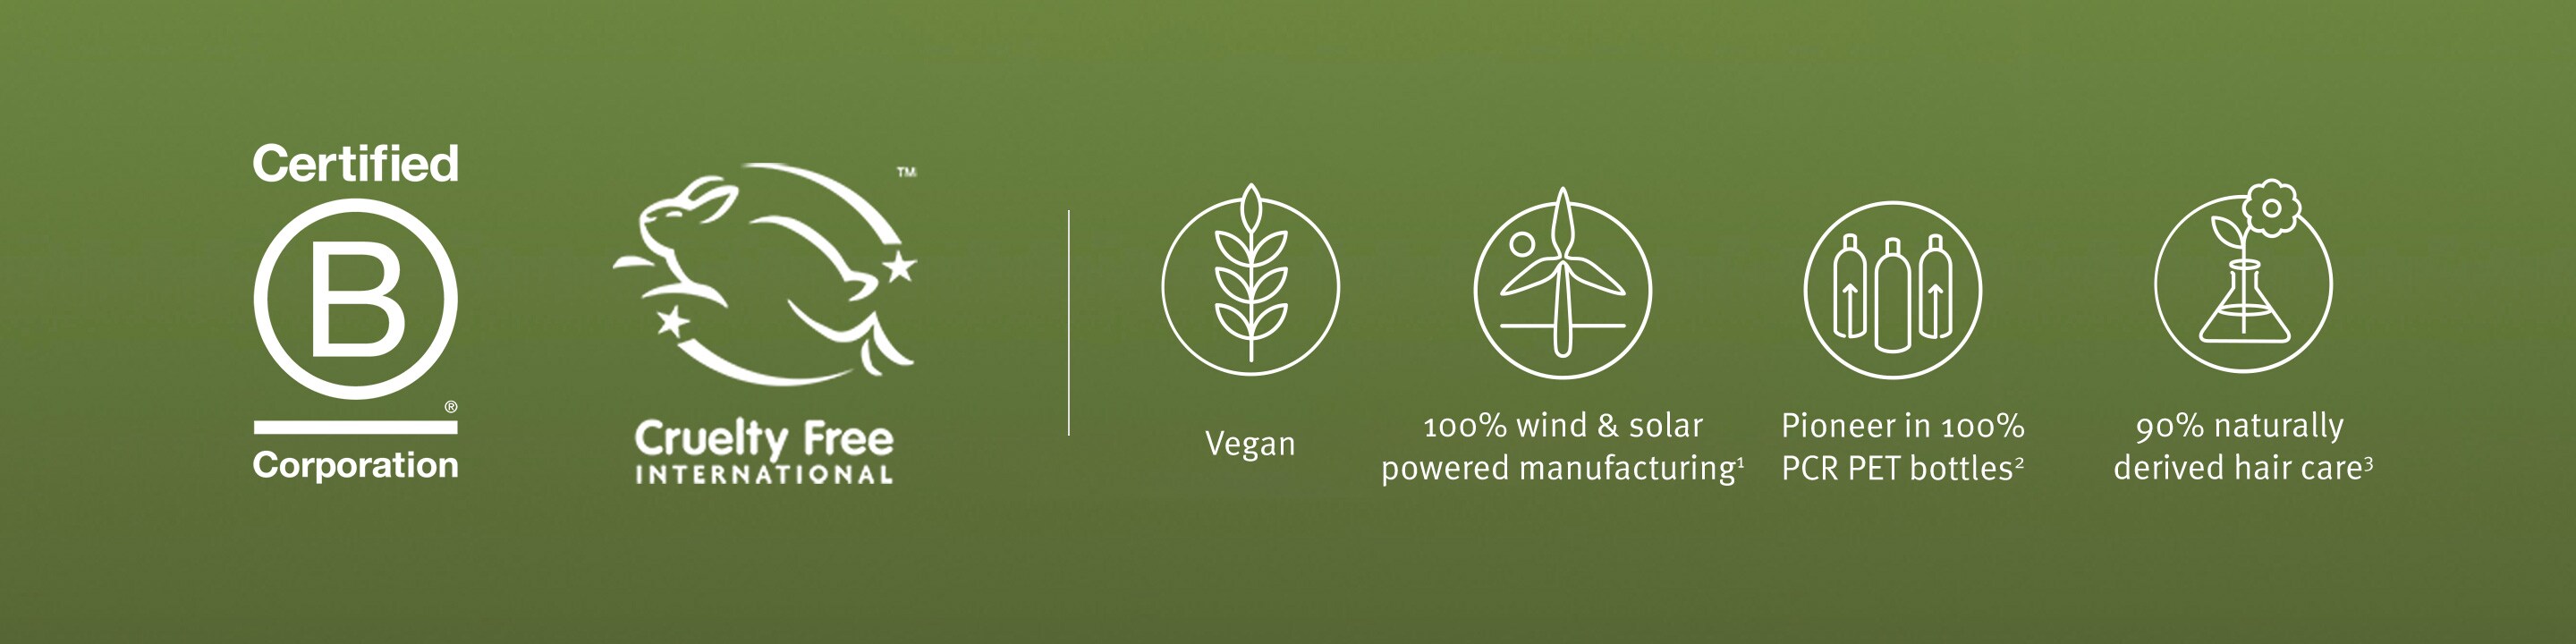 Learn more about Aveda's sustainable efforts